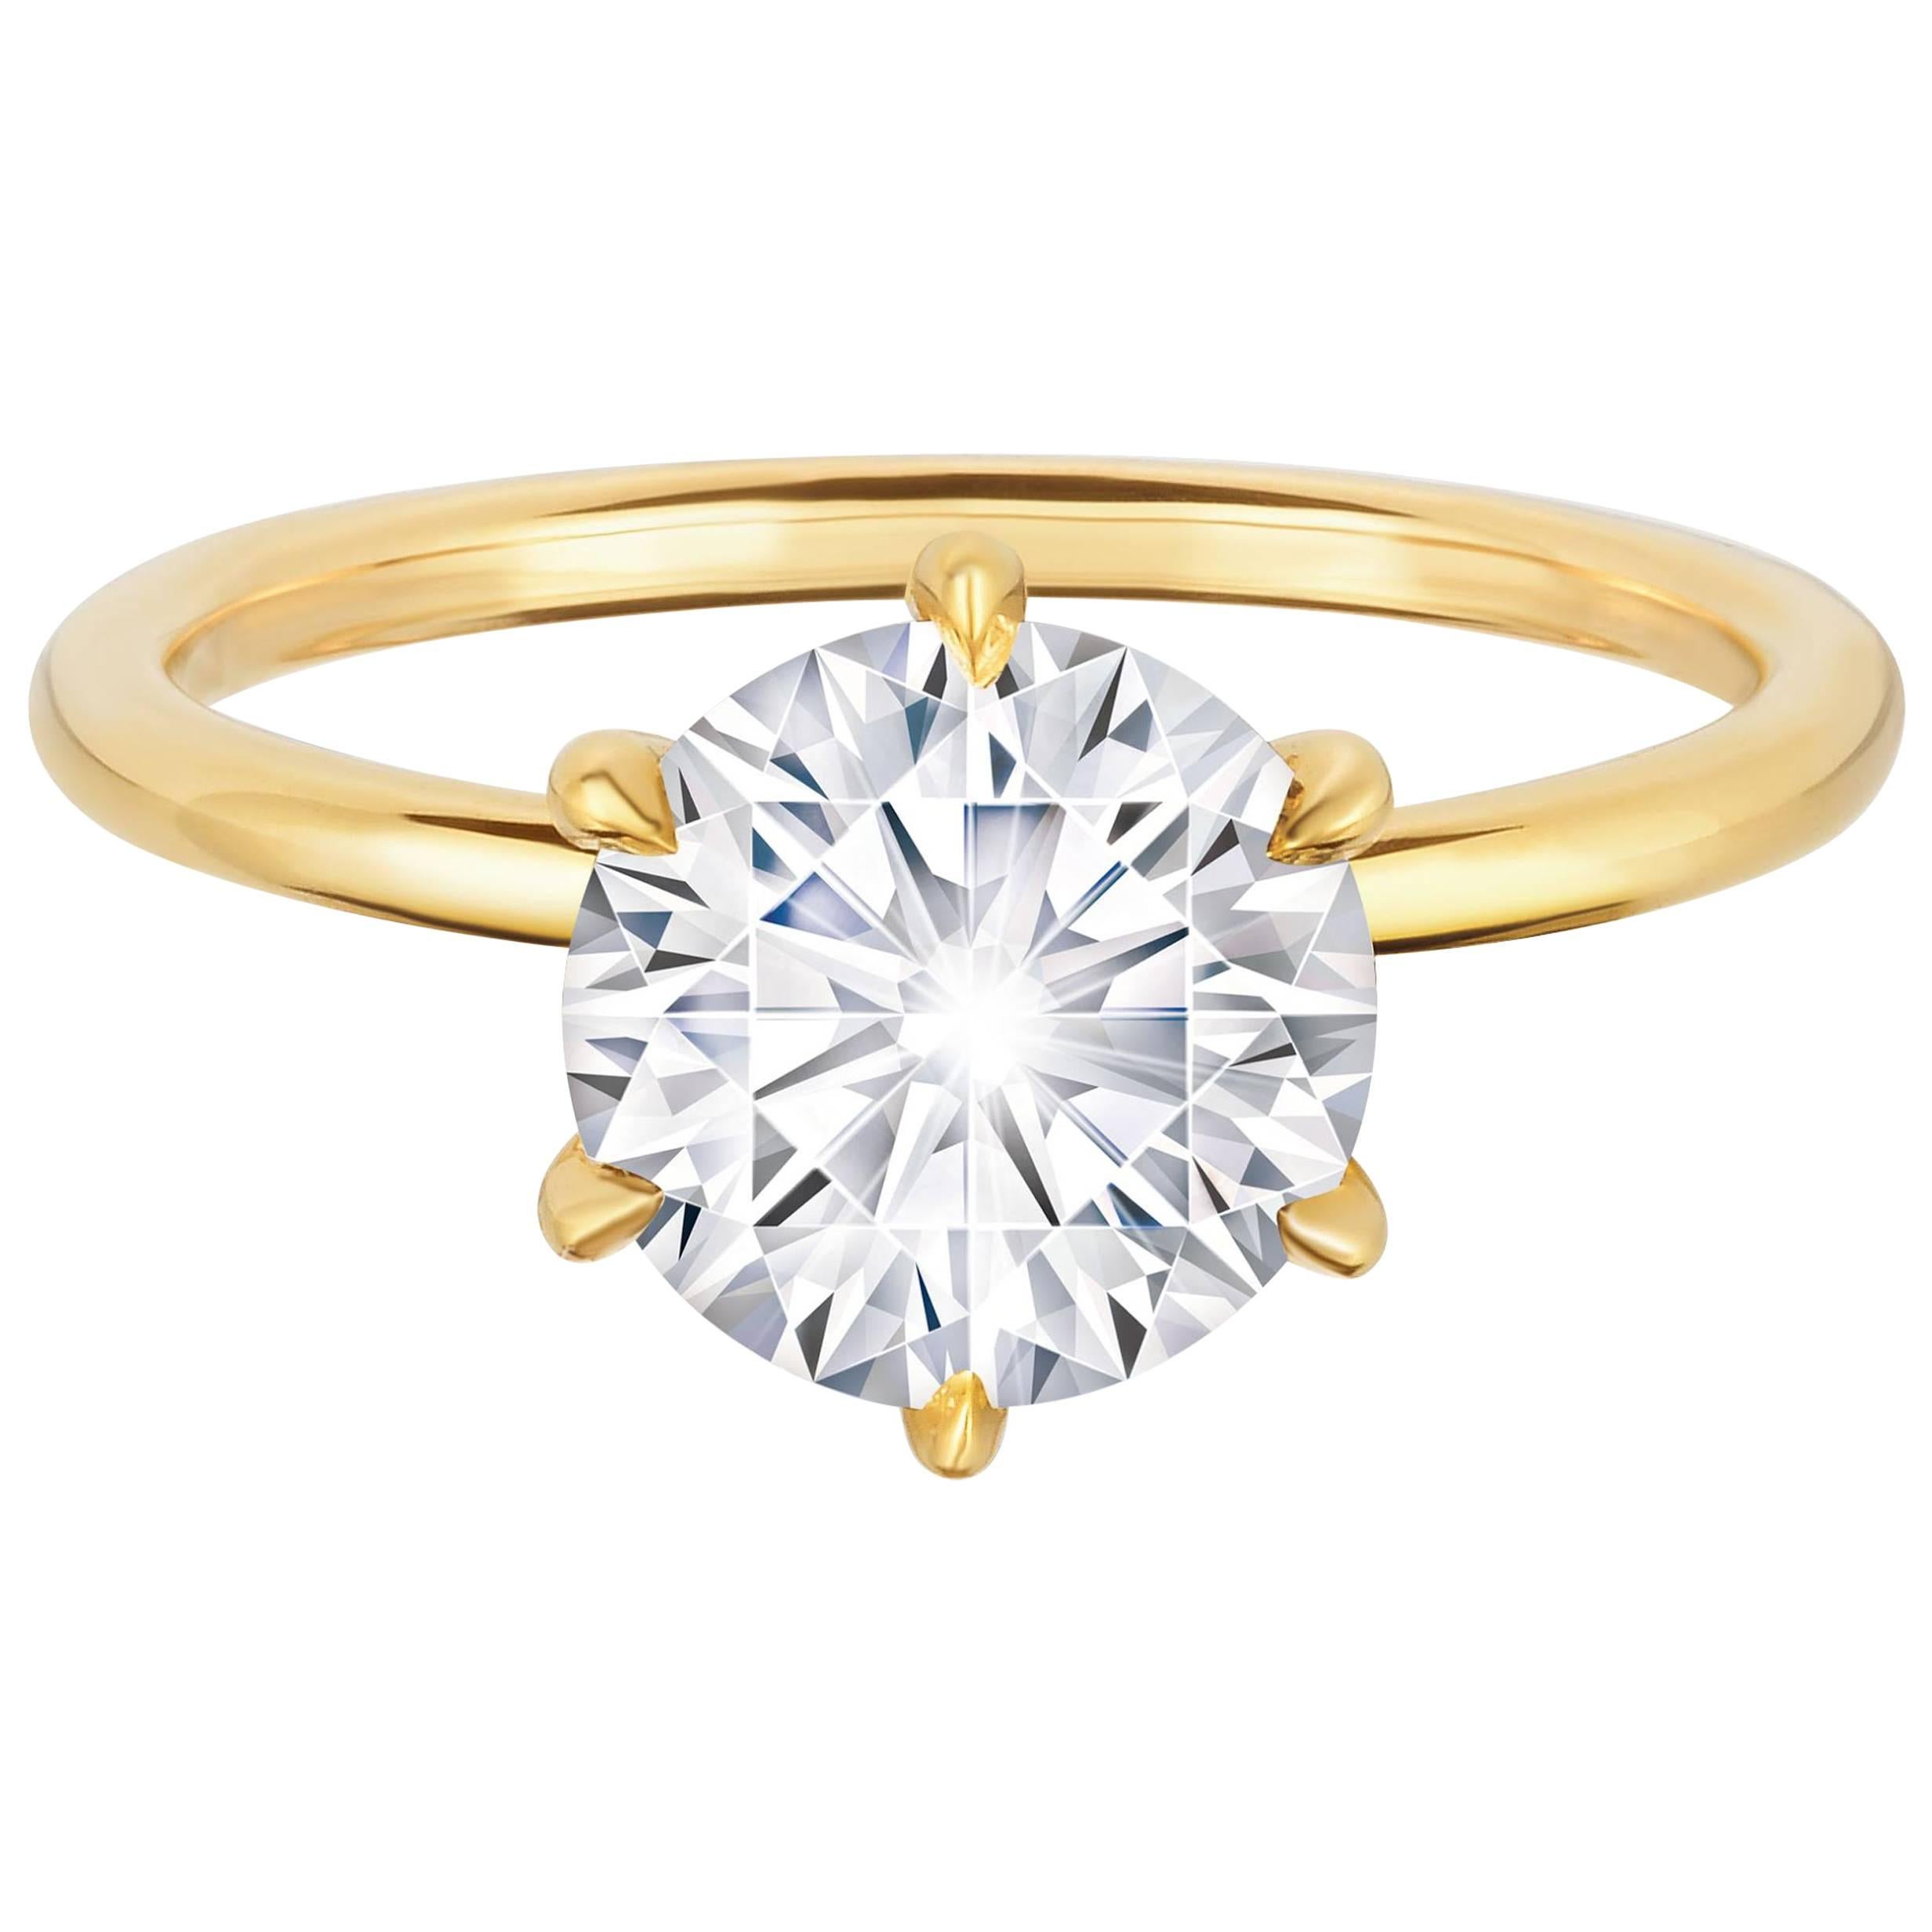 Marisa Perry 2.27 Carat Round Diamond Six Prong Engagement Ring Yellow Gold For Sale